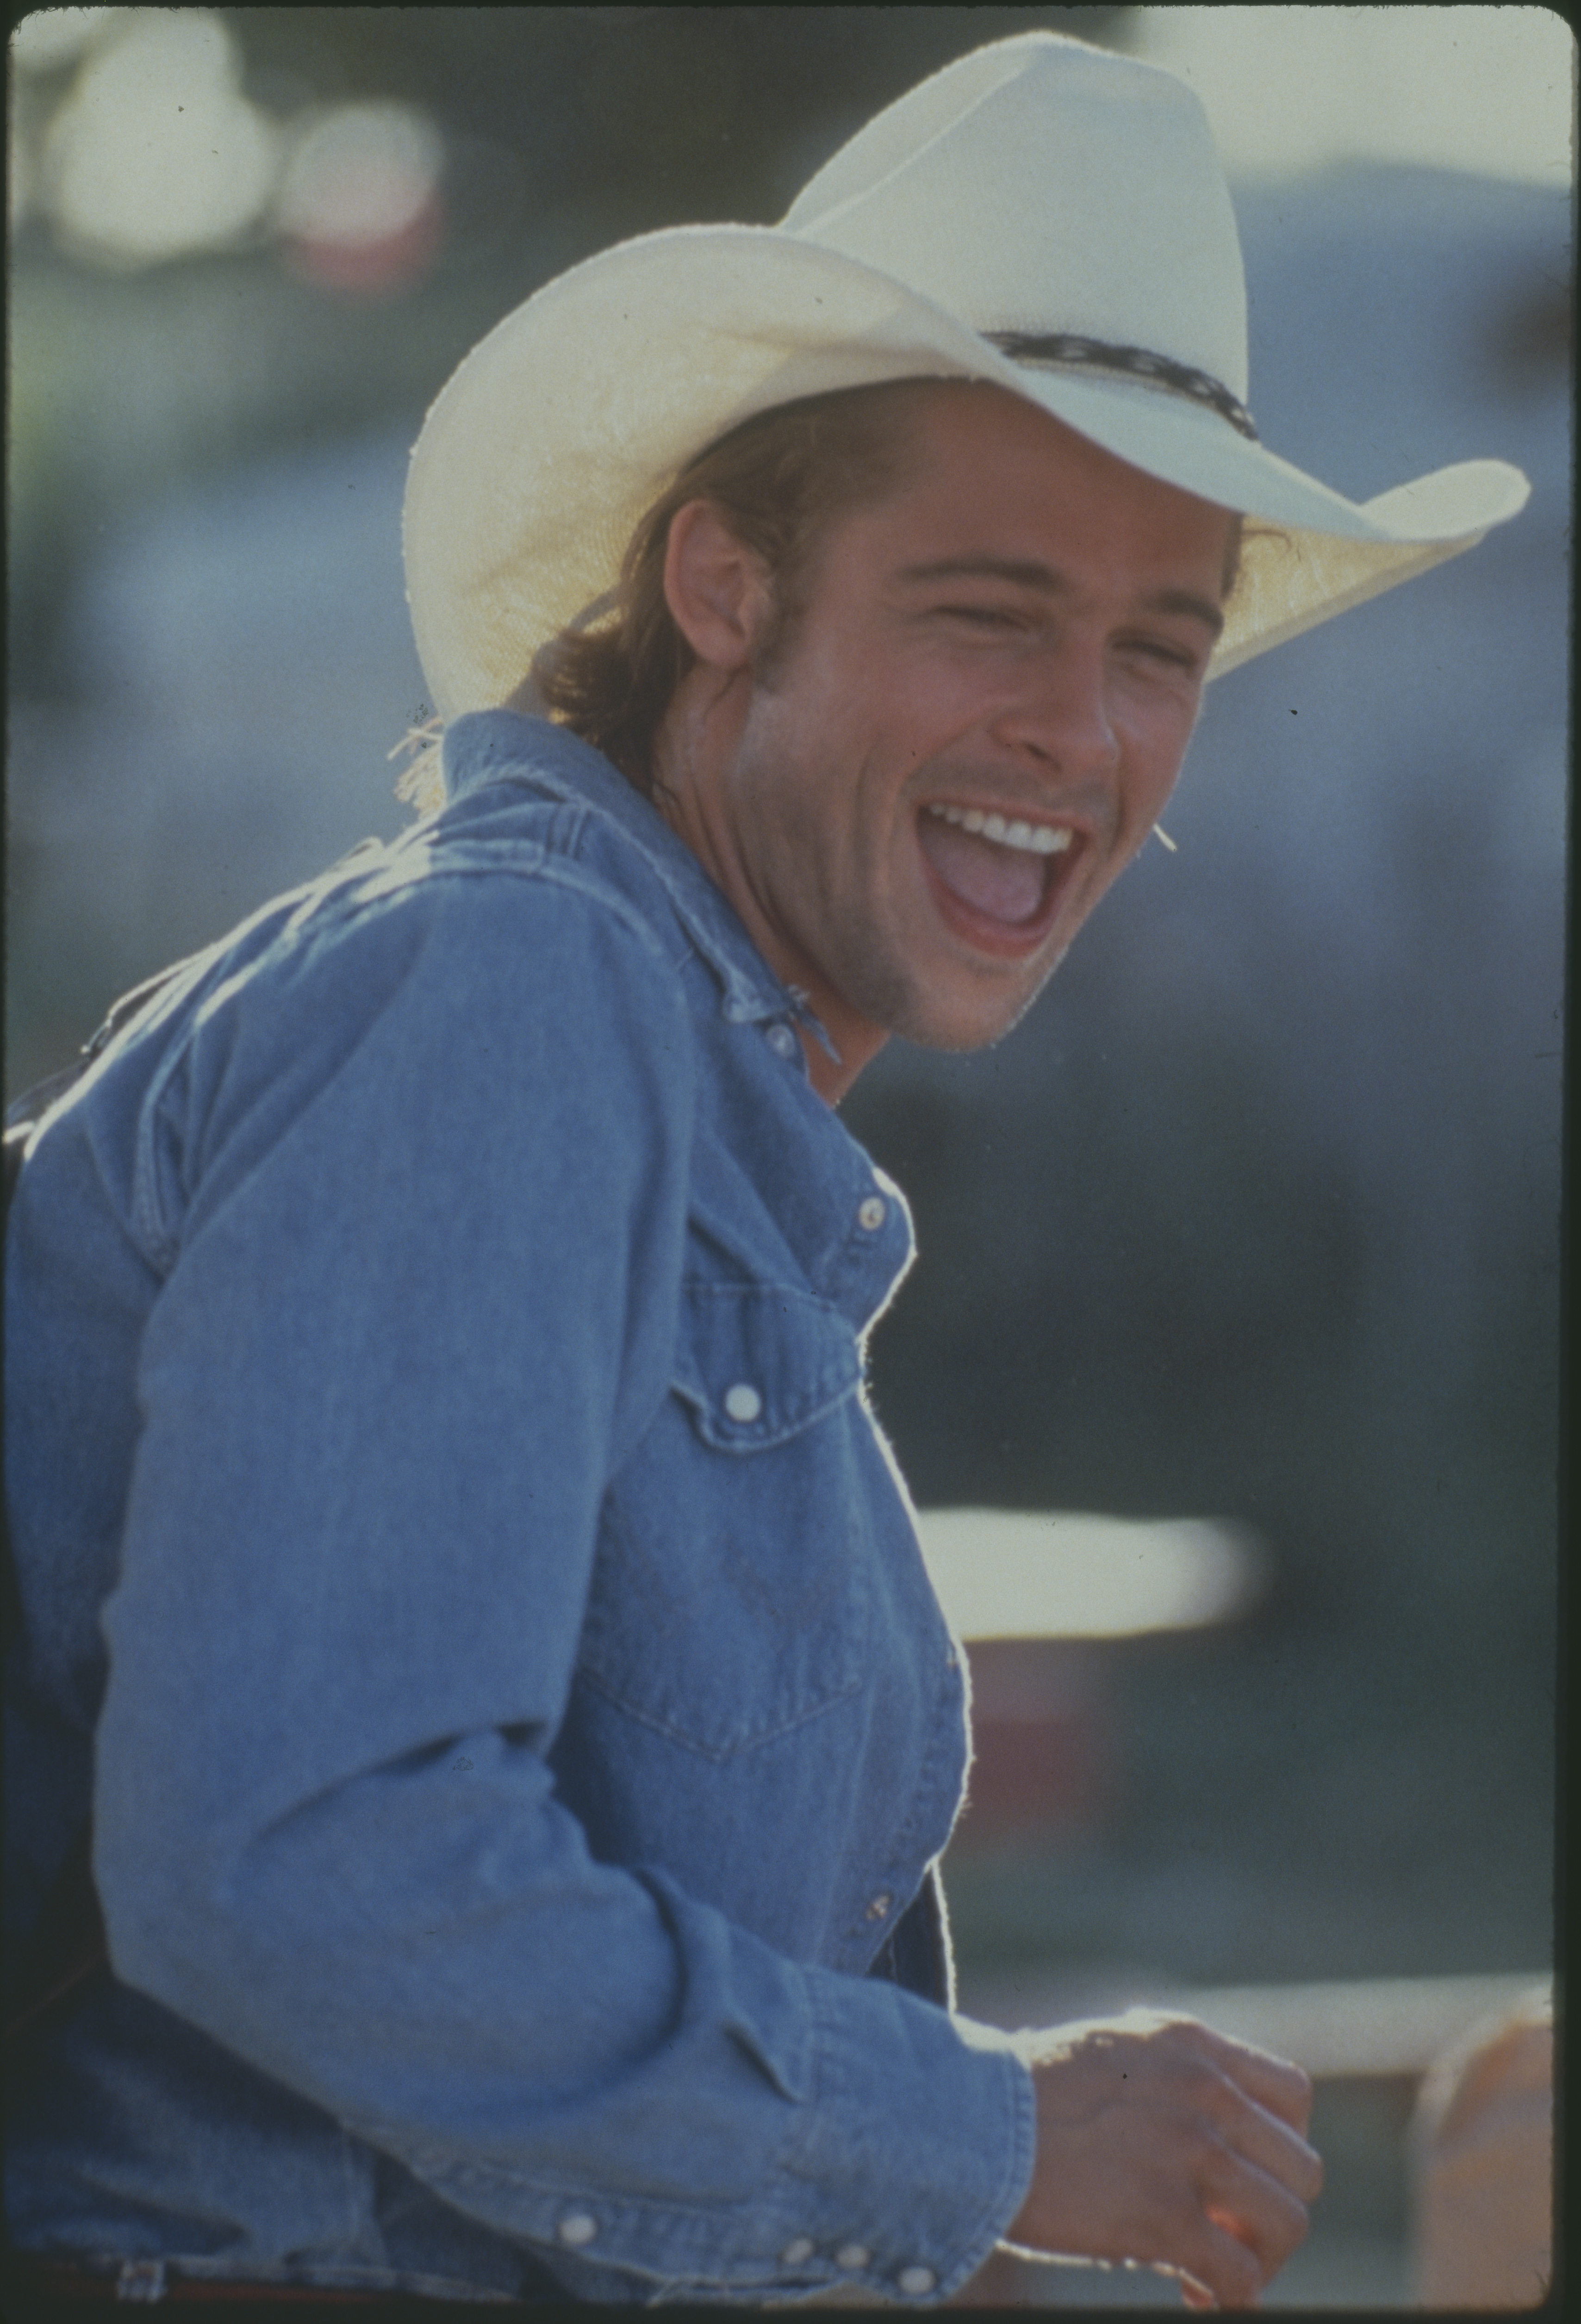 Brad Pitt as J.D. in "Thelma & Louise" in 1991 | Source: Getty Images